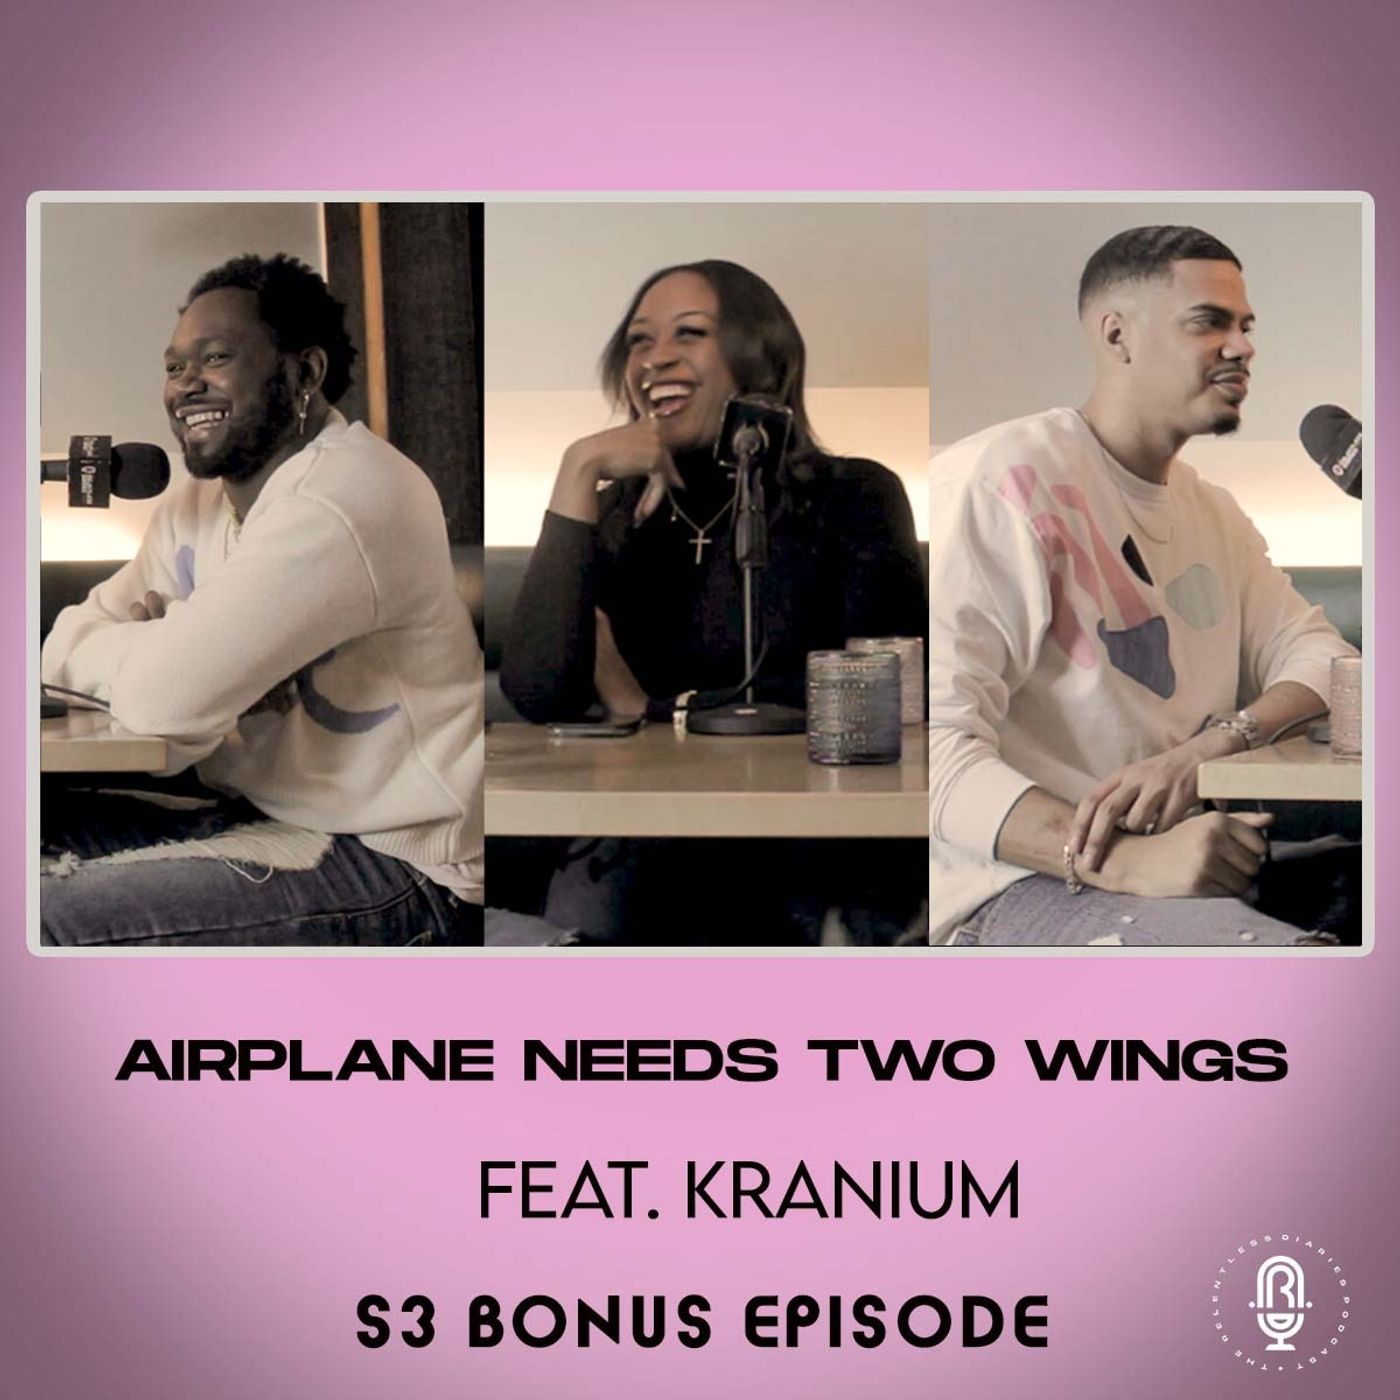 Airplane Needs Two Wings Feat. Kranium